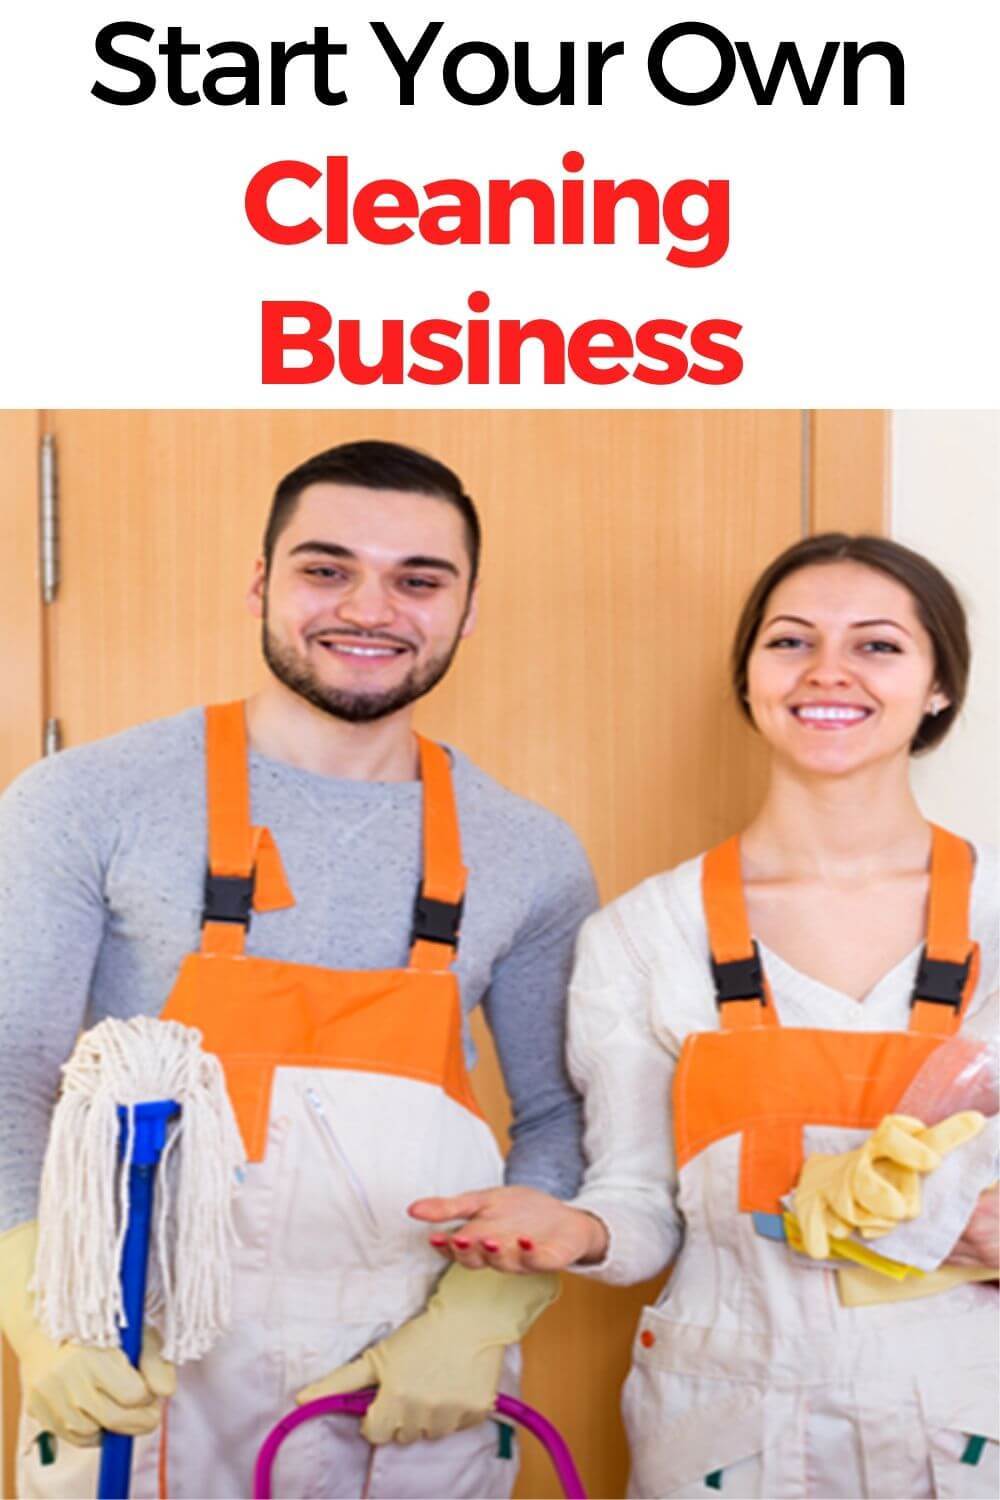 Start your own cleaning business